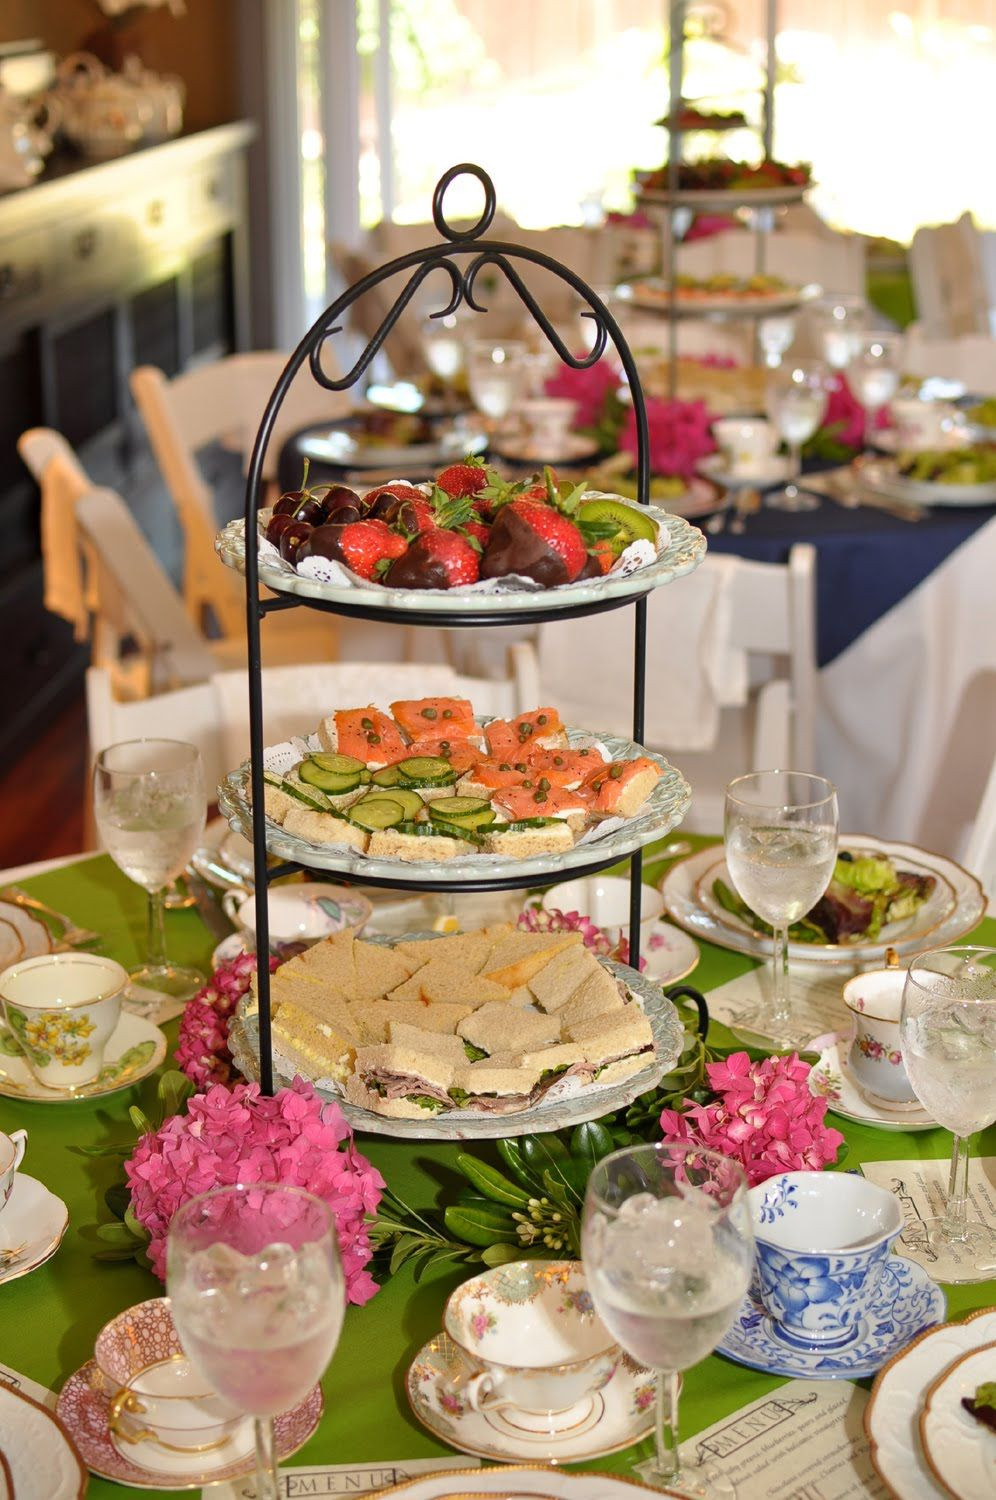 Bridal Shower Tea Party Food Ideas
 Lisa is Bossy This is how we do it wedding